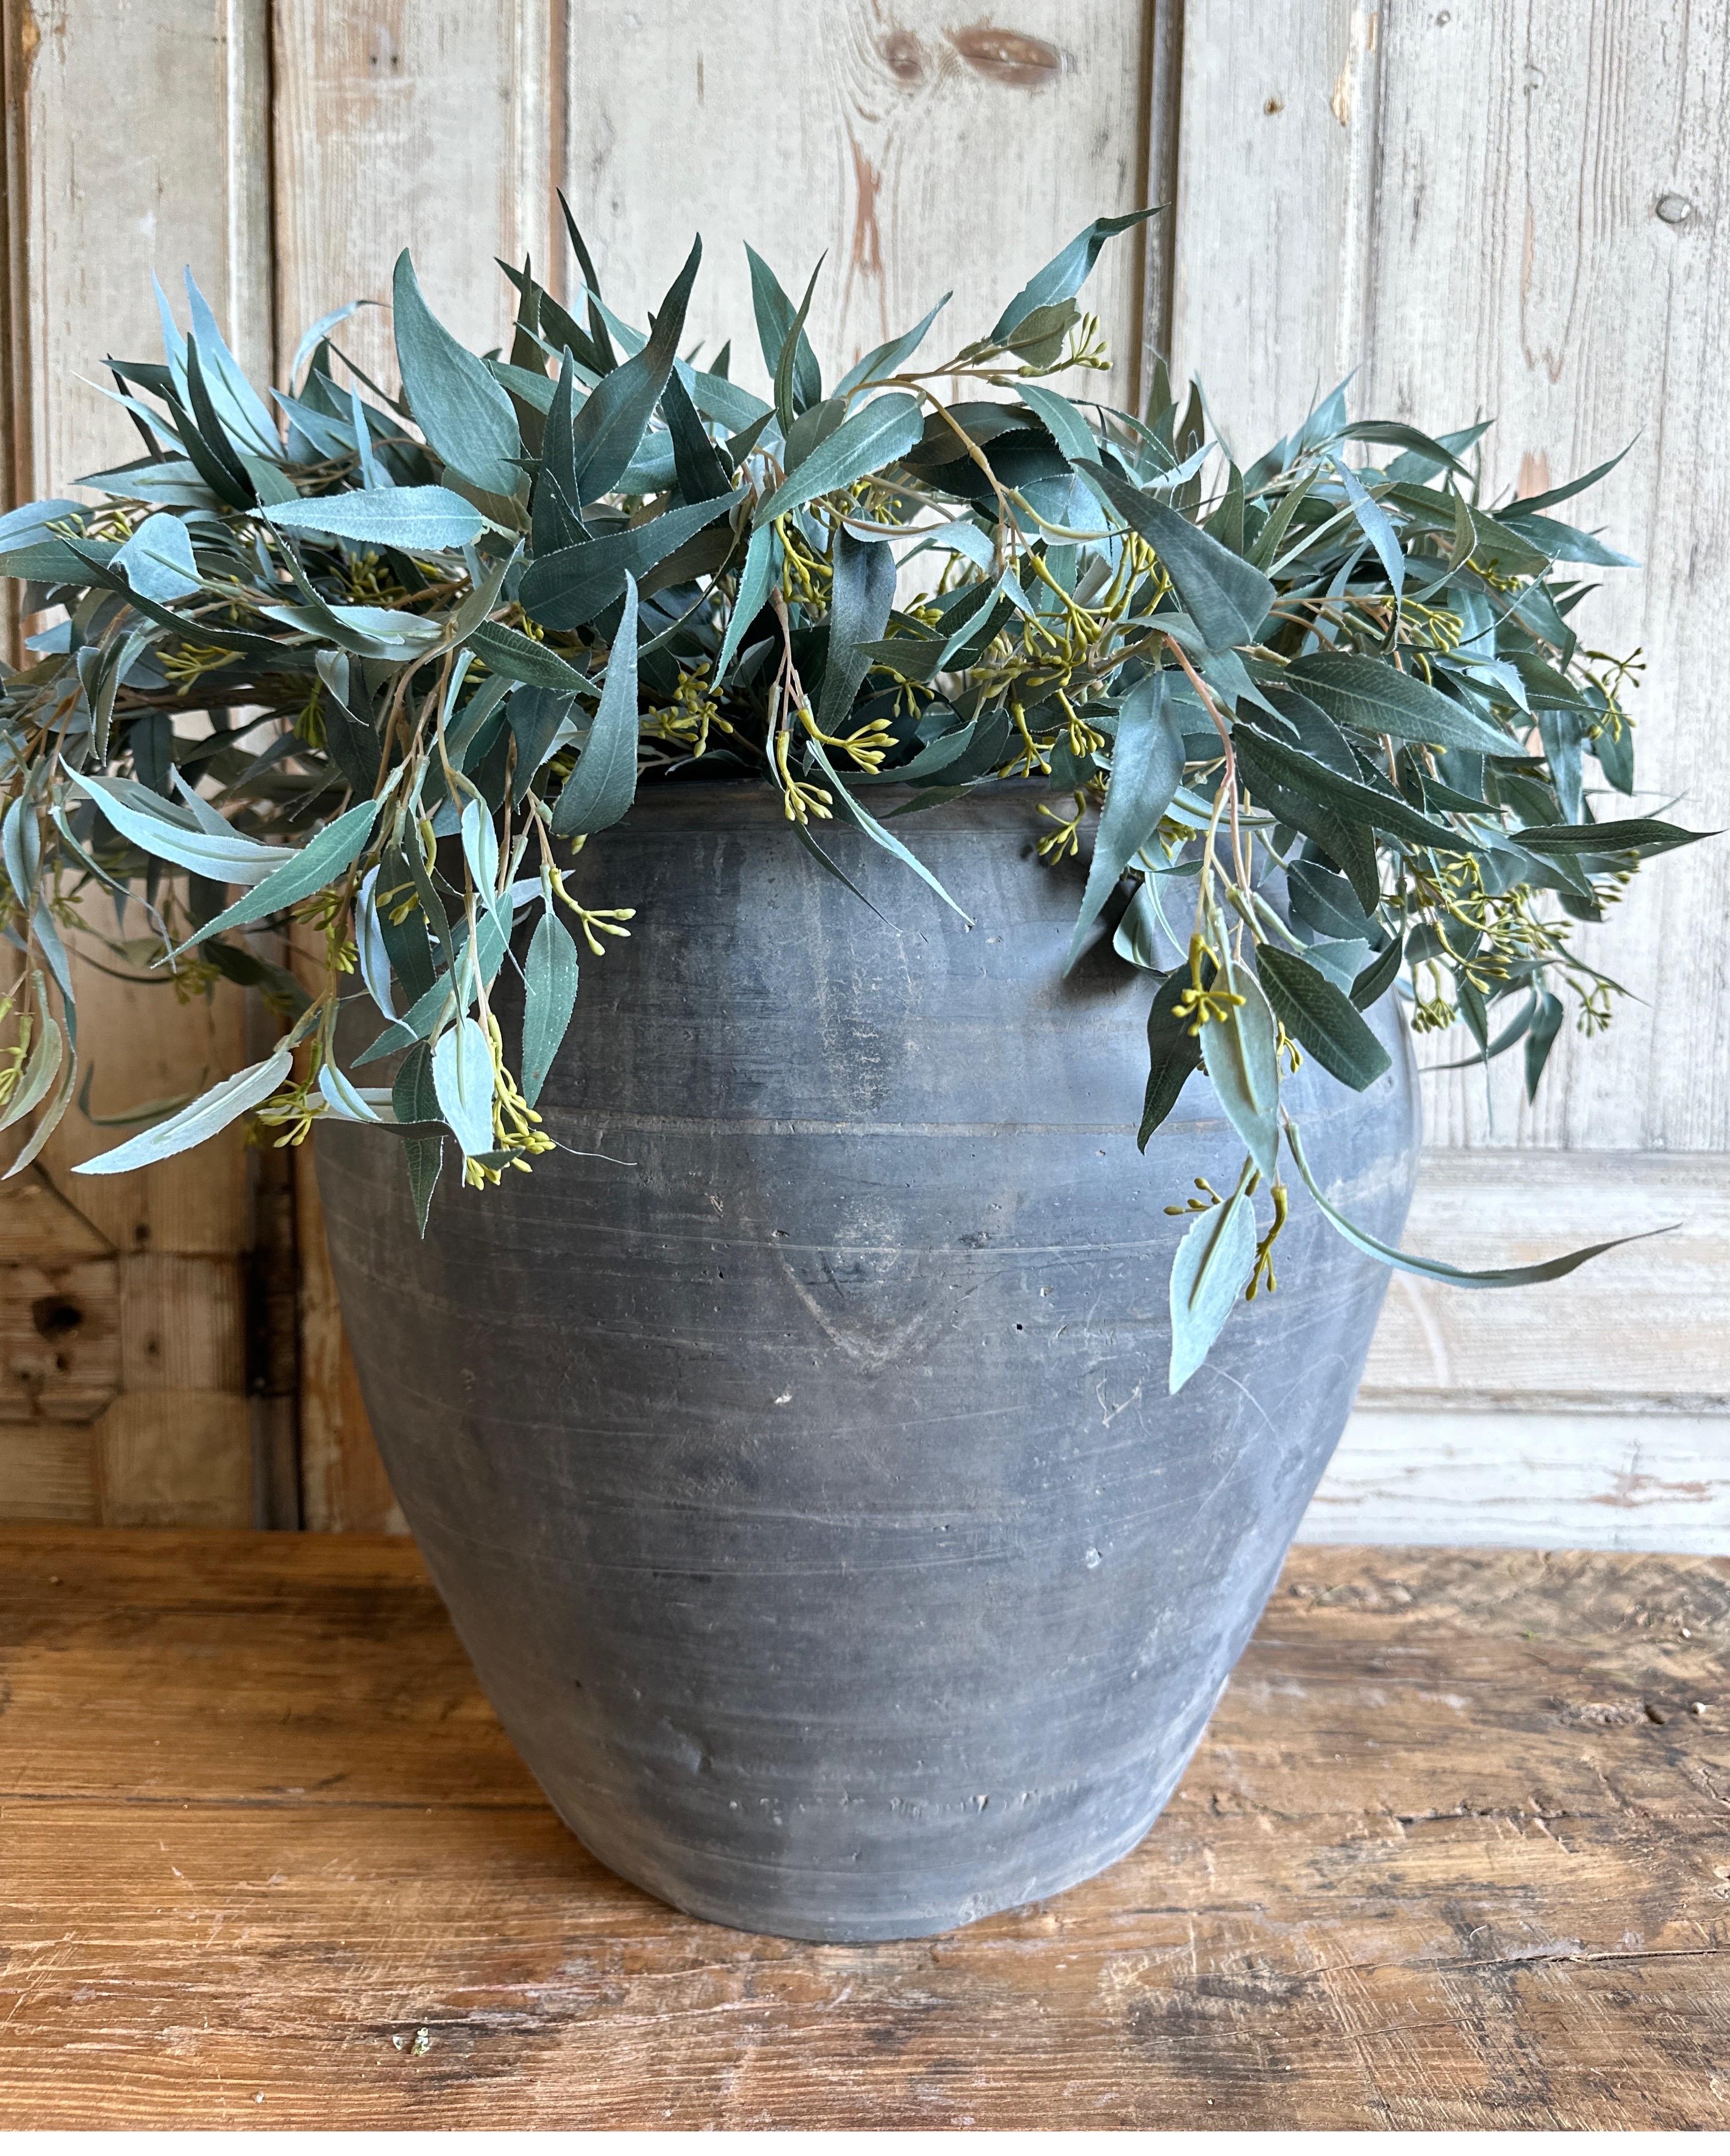 The Grey Croix Pot is a Vintage clay pot that is beautifully colored and authentically worn. The surface of the pot and handle are peeling in places, revealing the original clay below. These qualities give the pot a lived-in appearance and will